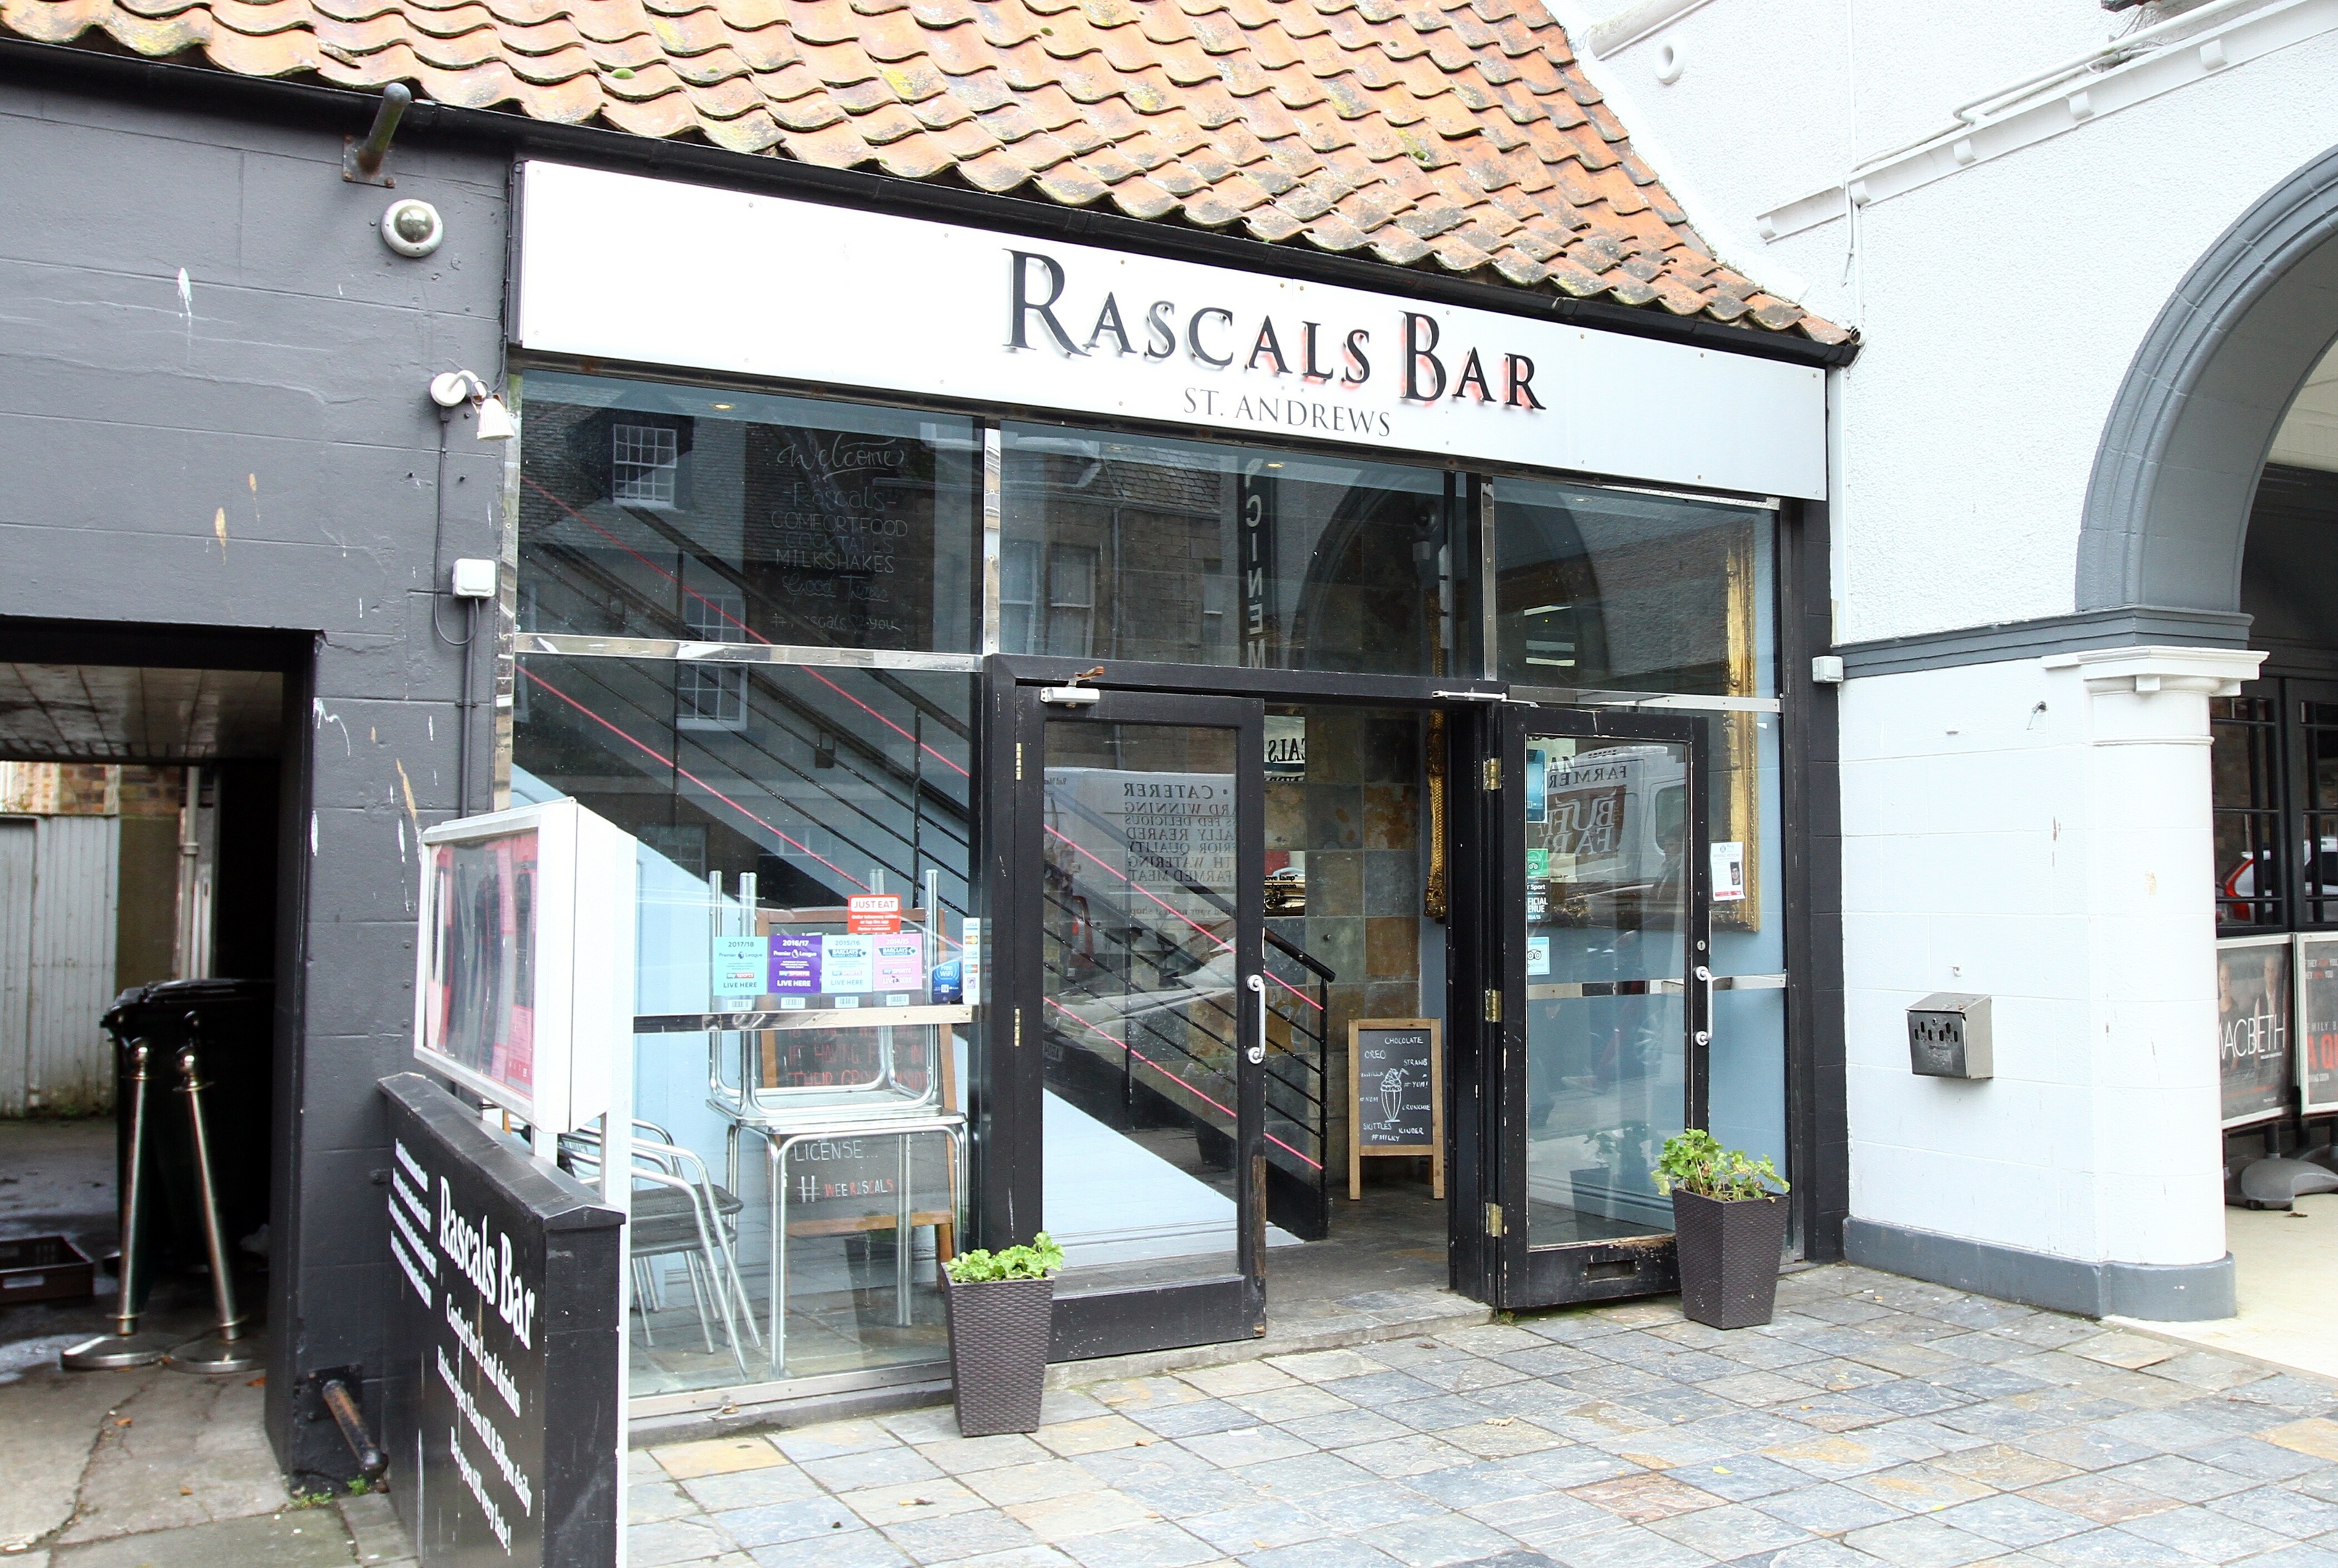 Rascals Bar in North Street, St Andrews will be refurbished in September.